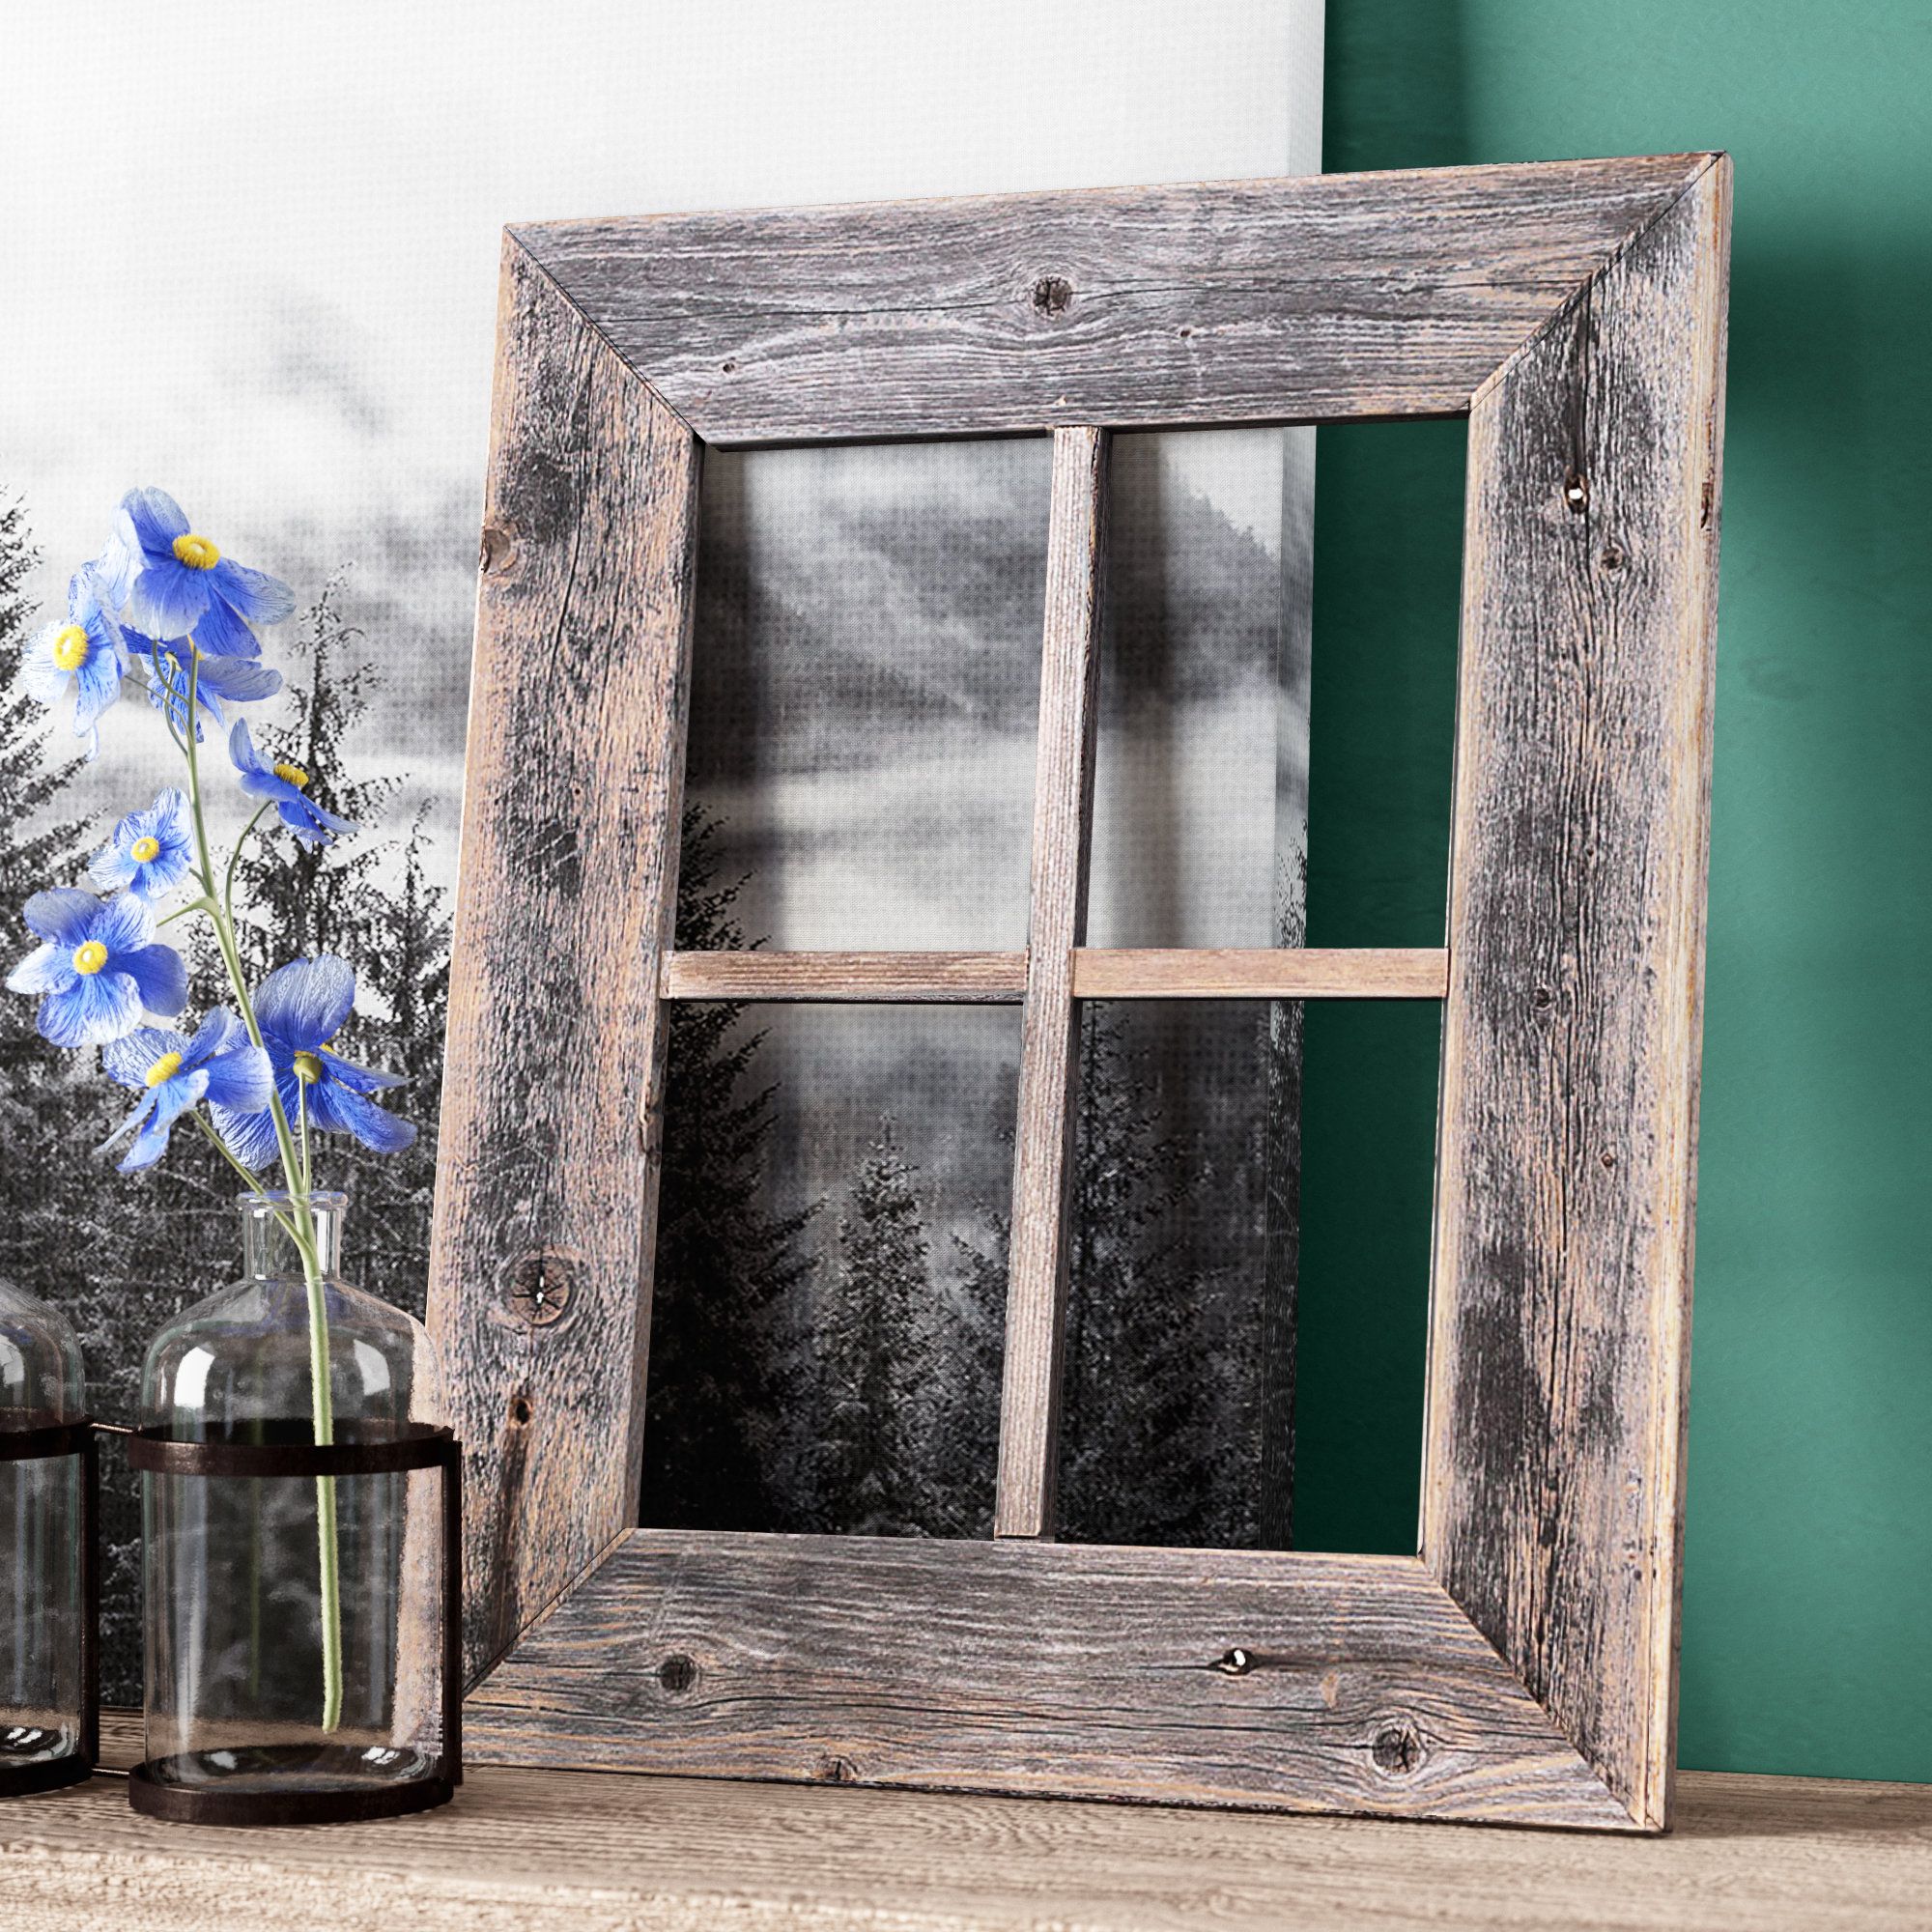 Wayfair With Famous Old Rustic Barn Window Frame (View 1 of 20)